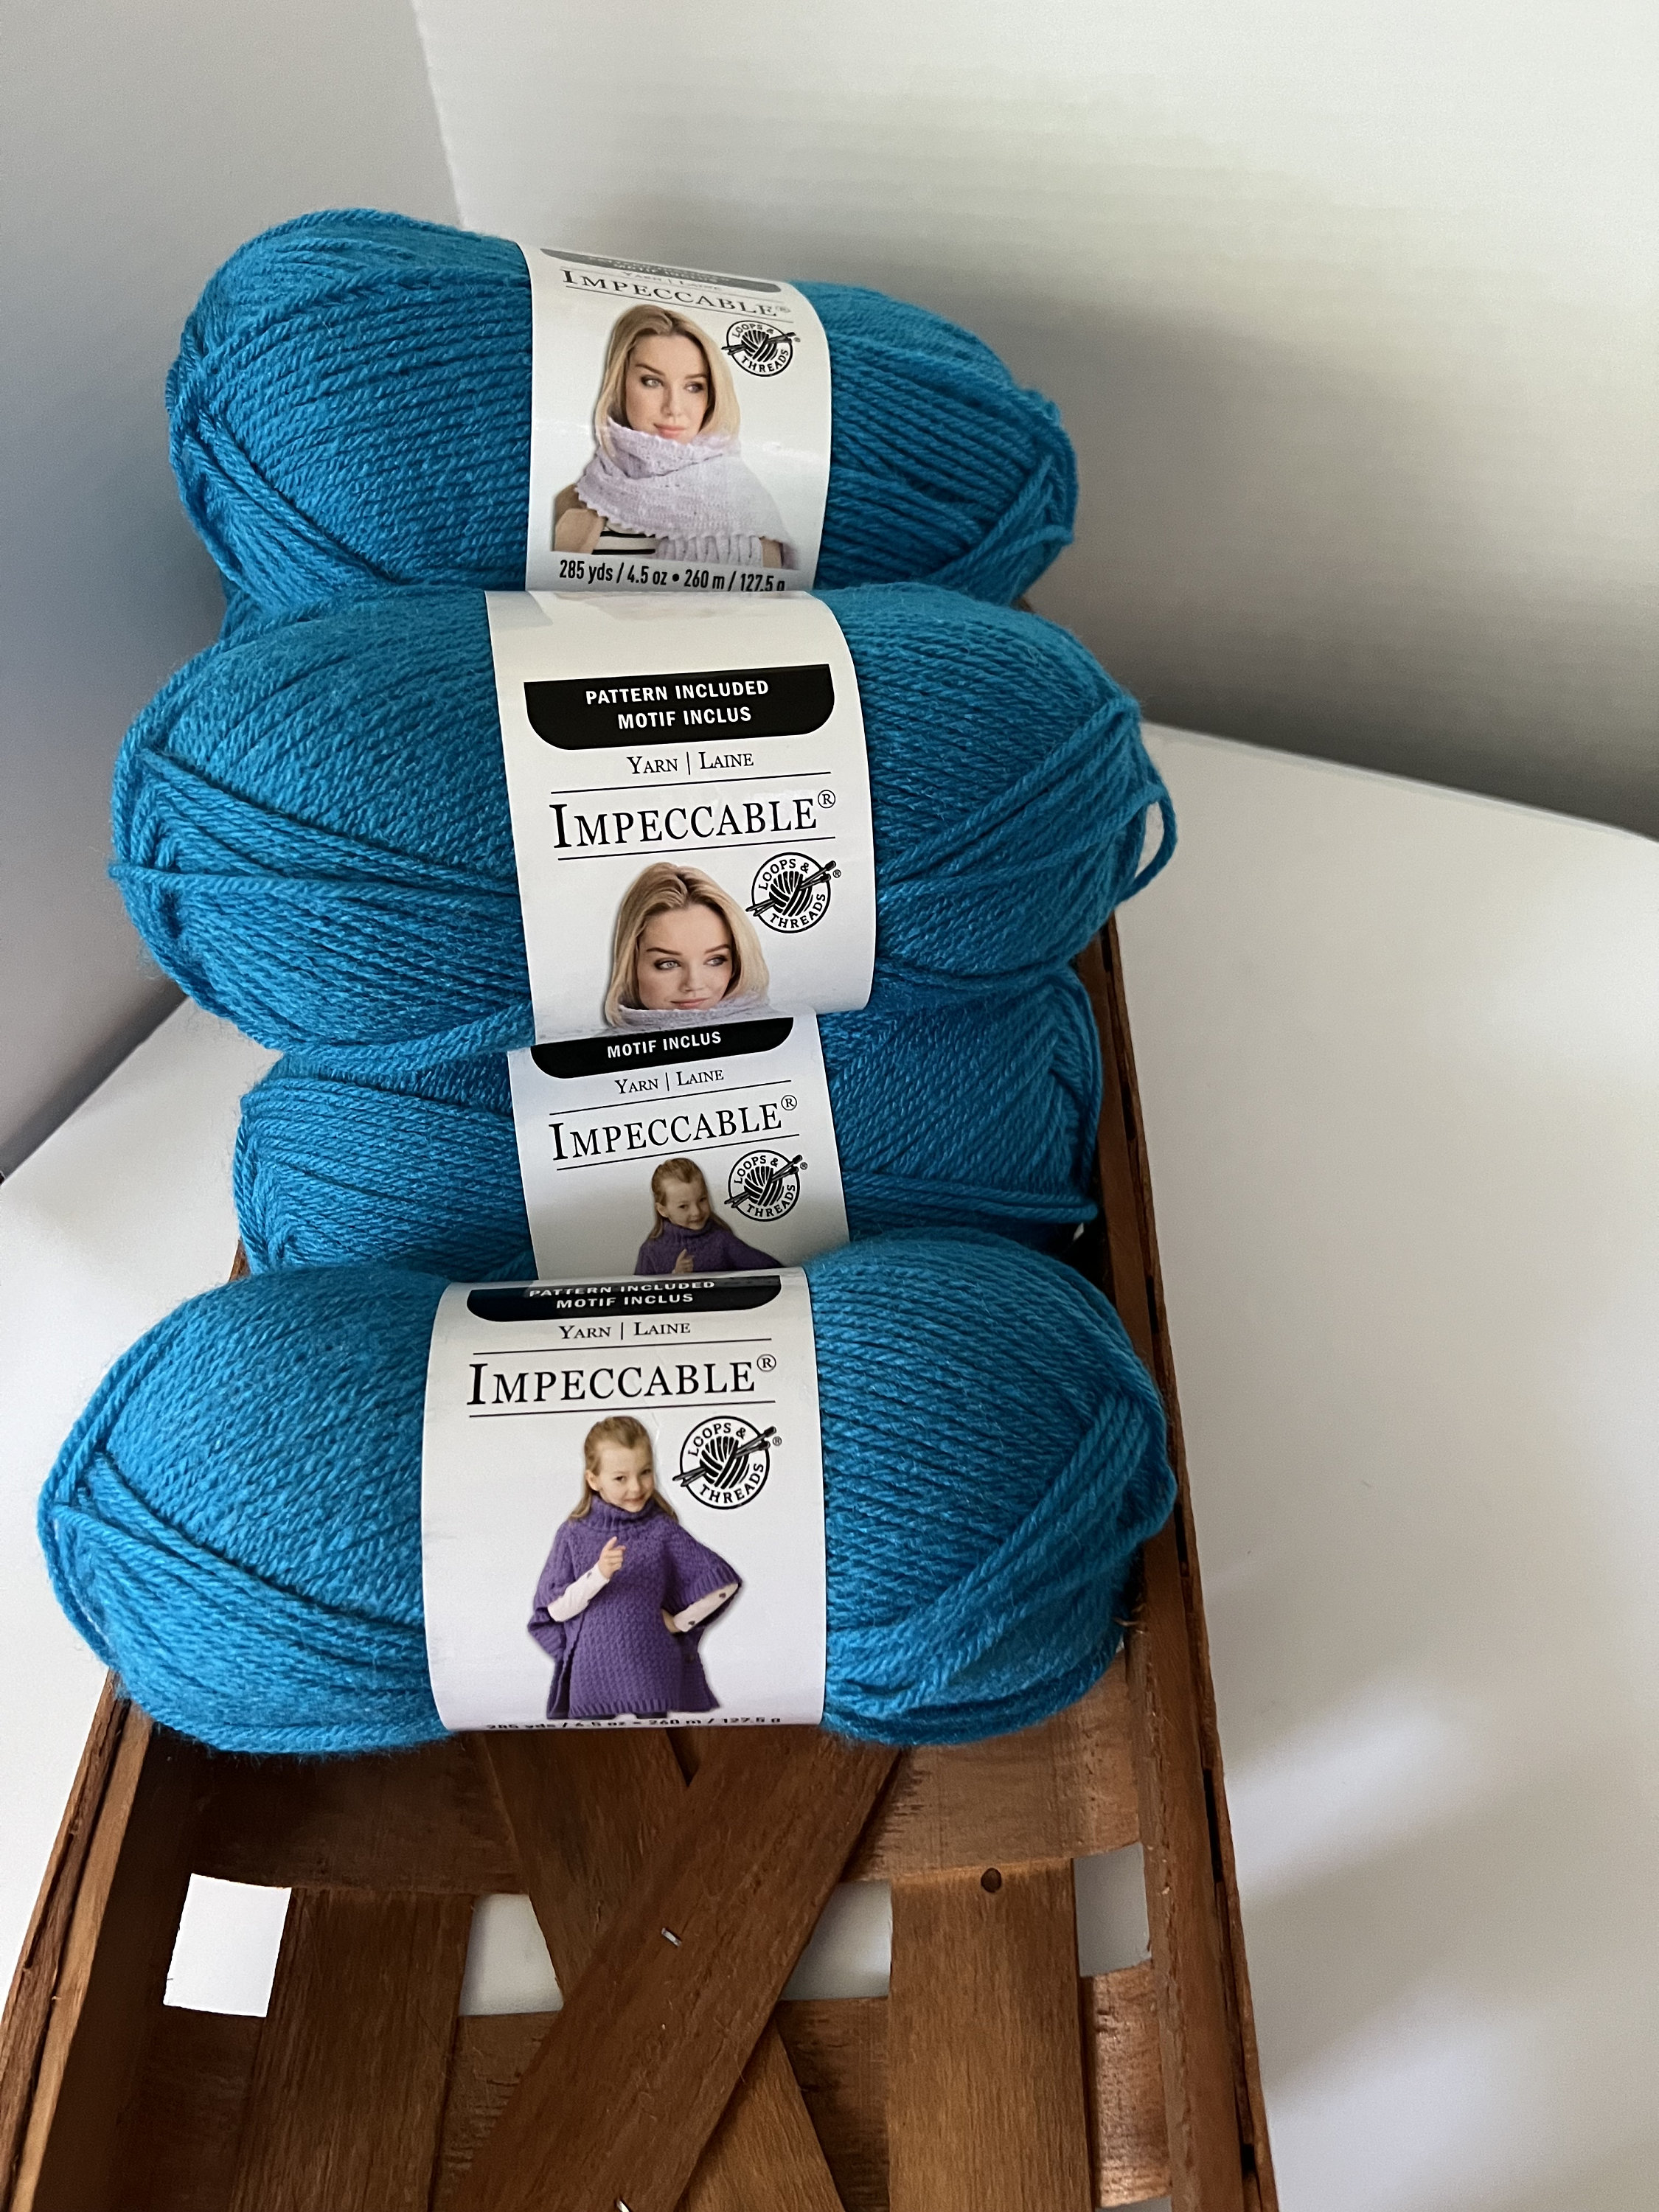 Loops & Threads Impeccable Yarn 4.5 oz Kelly Green (3-pack)